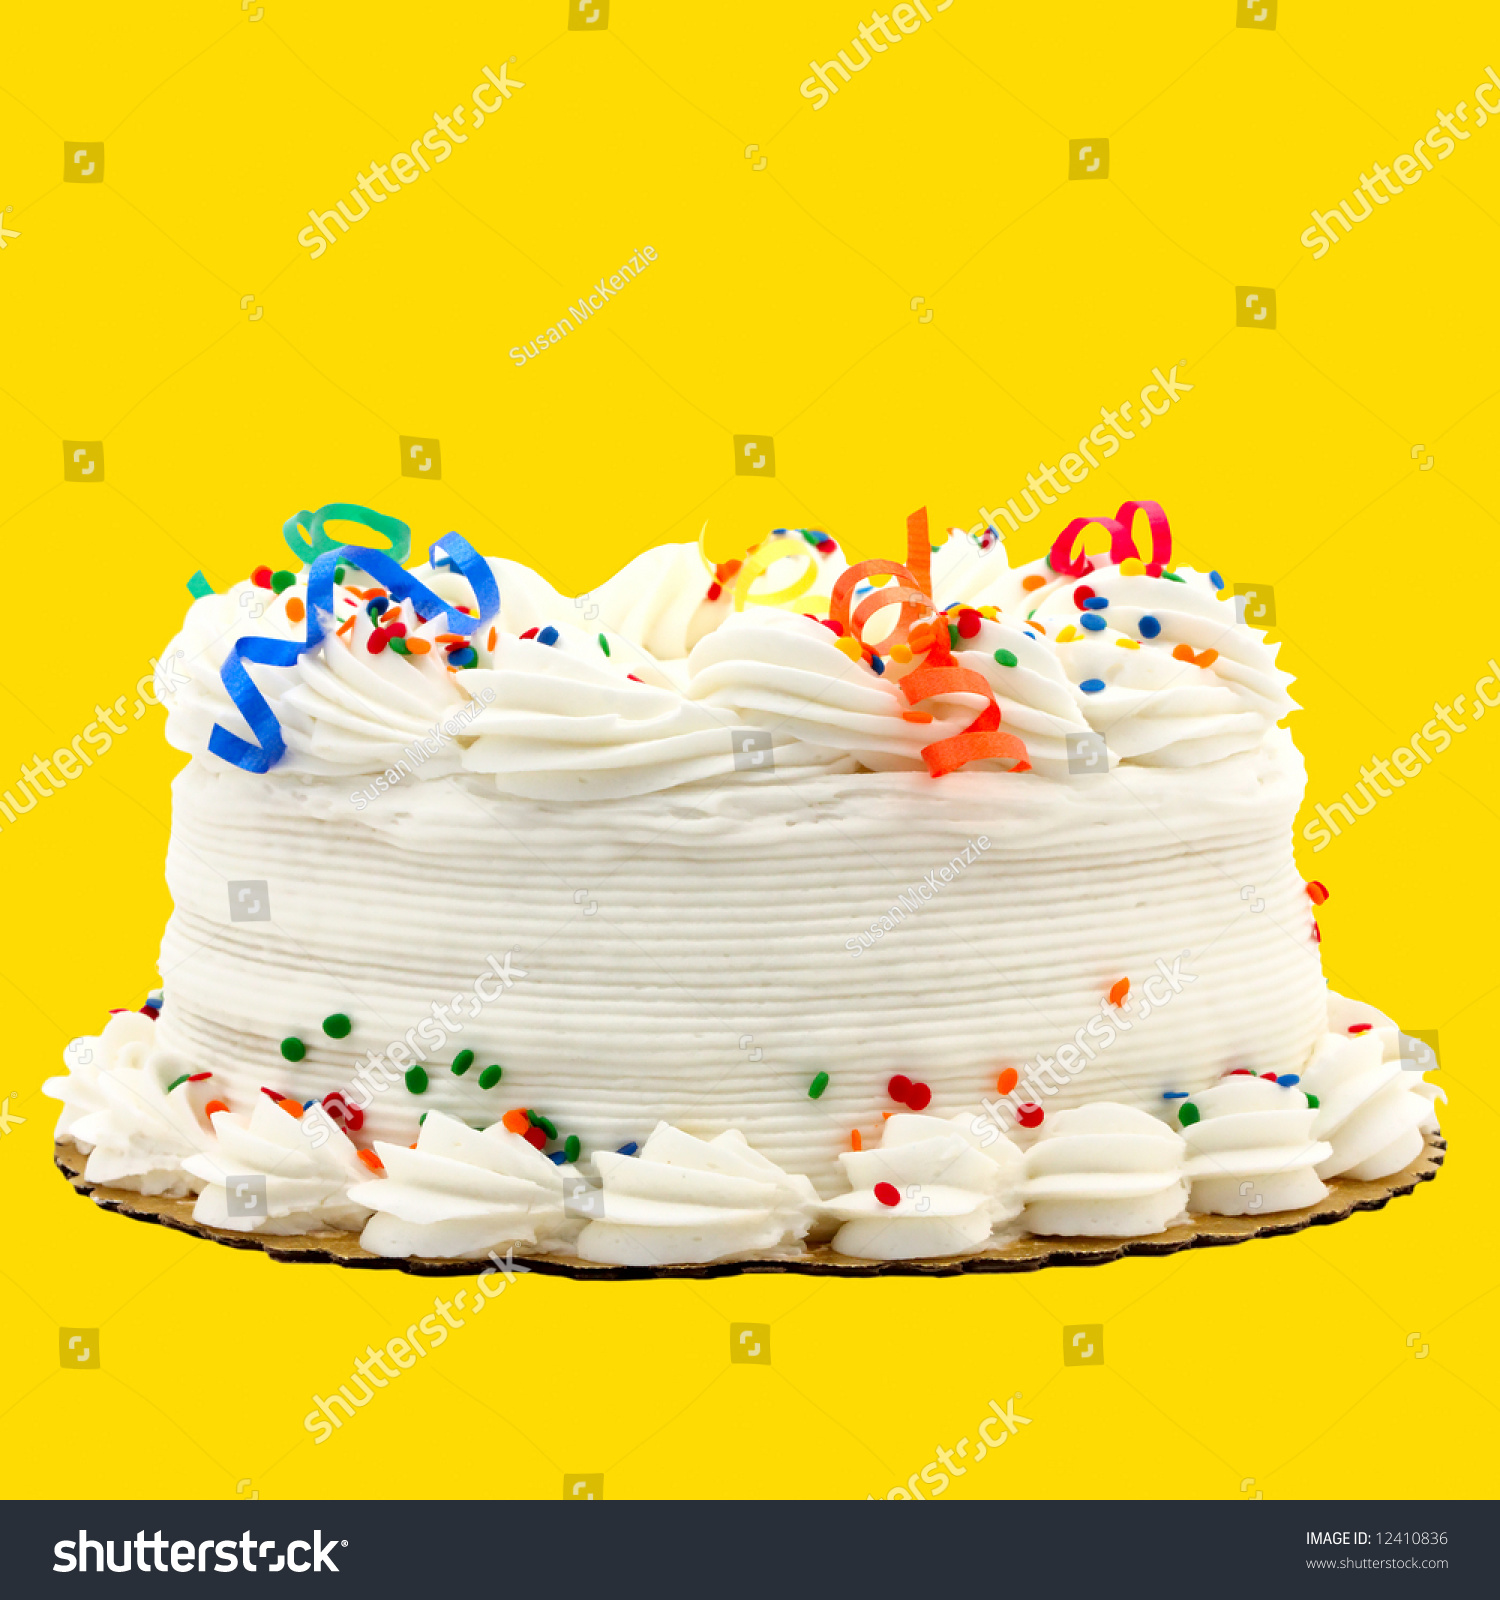 Yellow Cake with Red and Blue Decorations